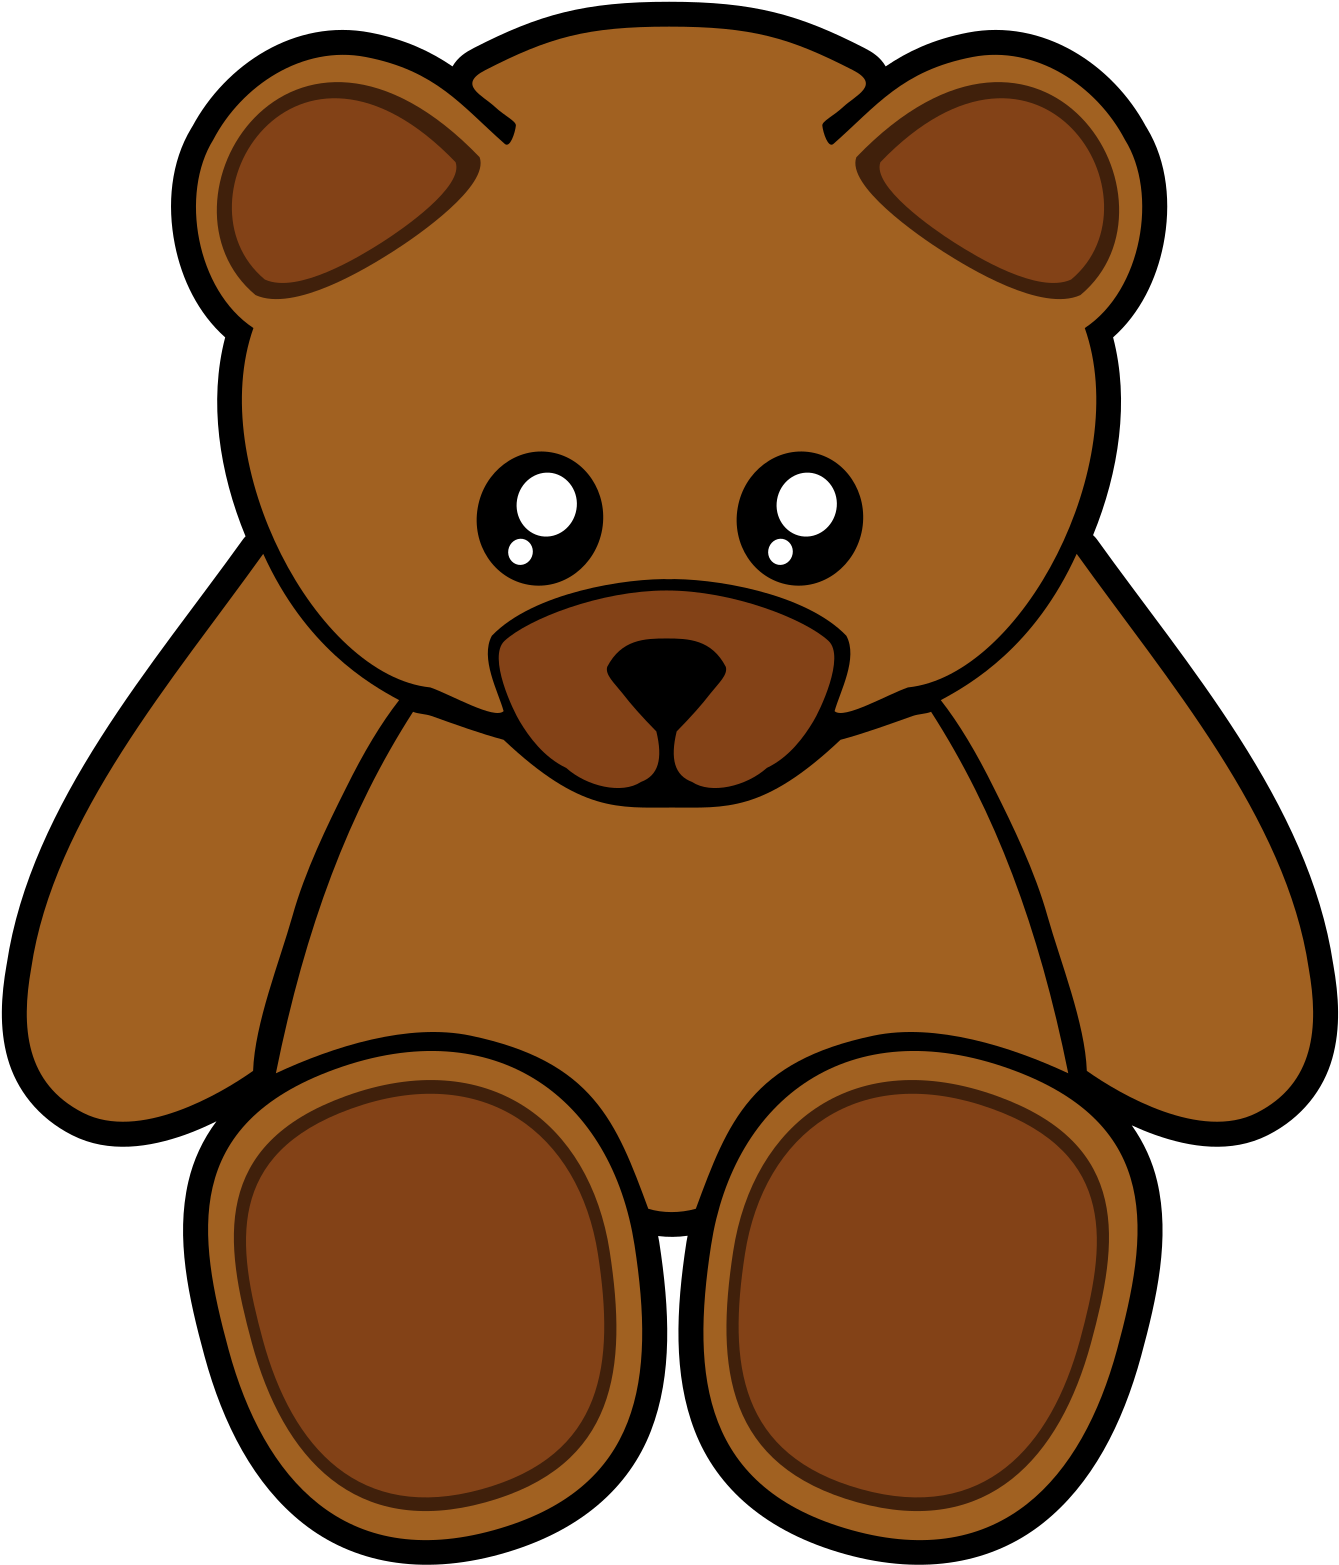 Vector Bear Teddy PNG Image High Quality PNG Image